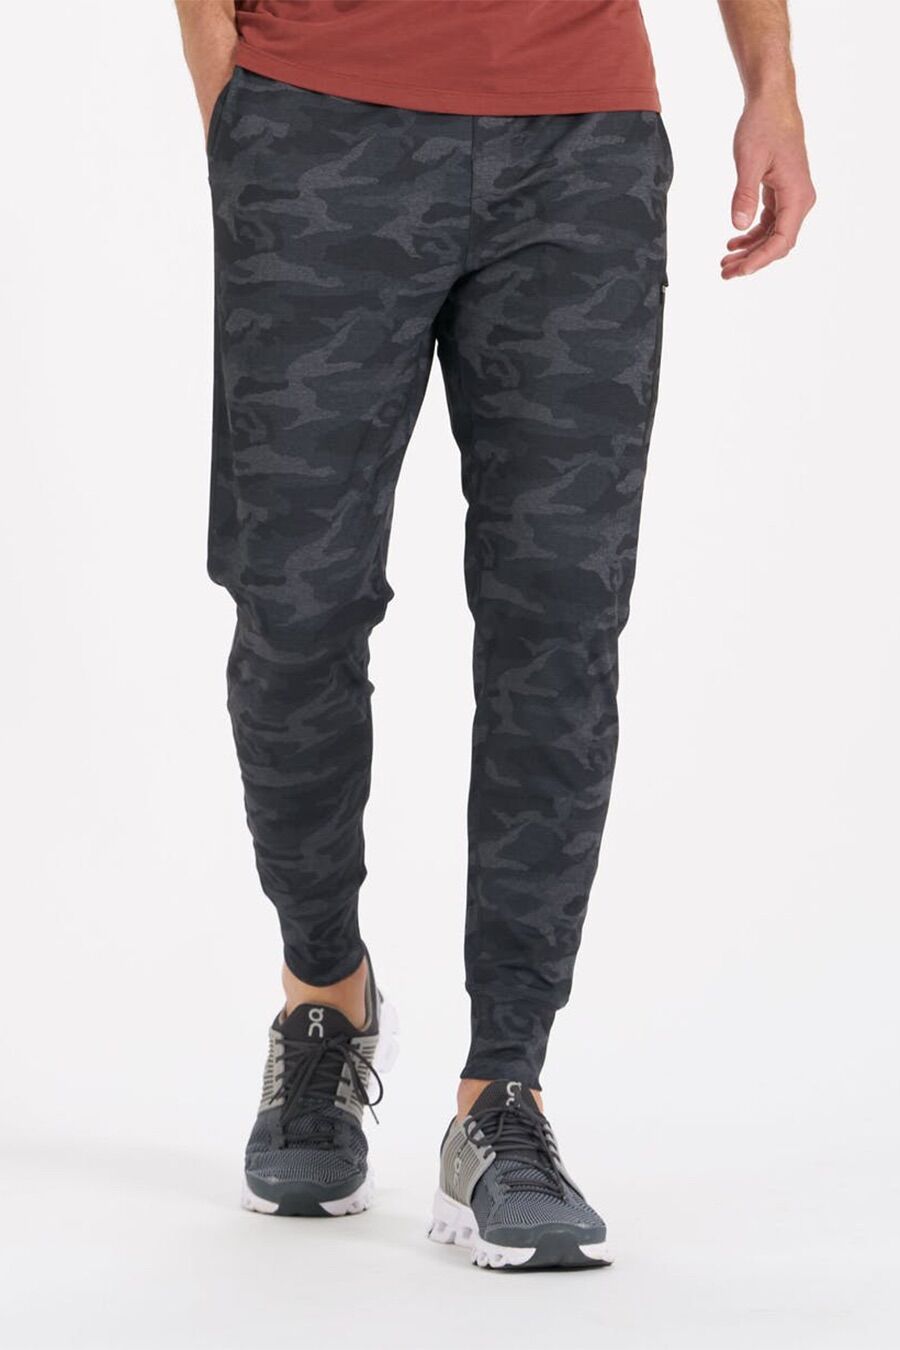 Gift Guide - Joggers